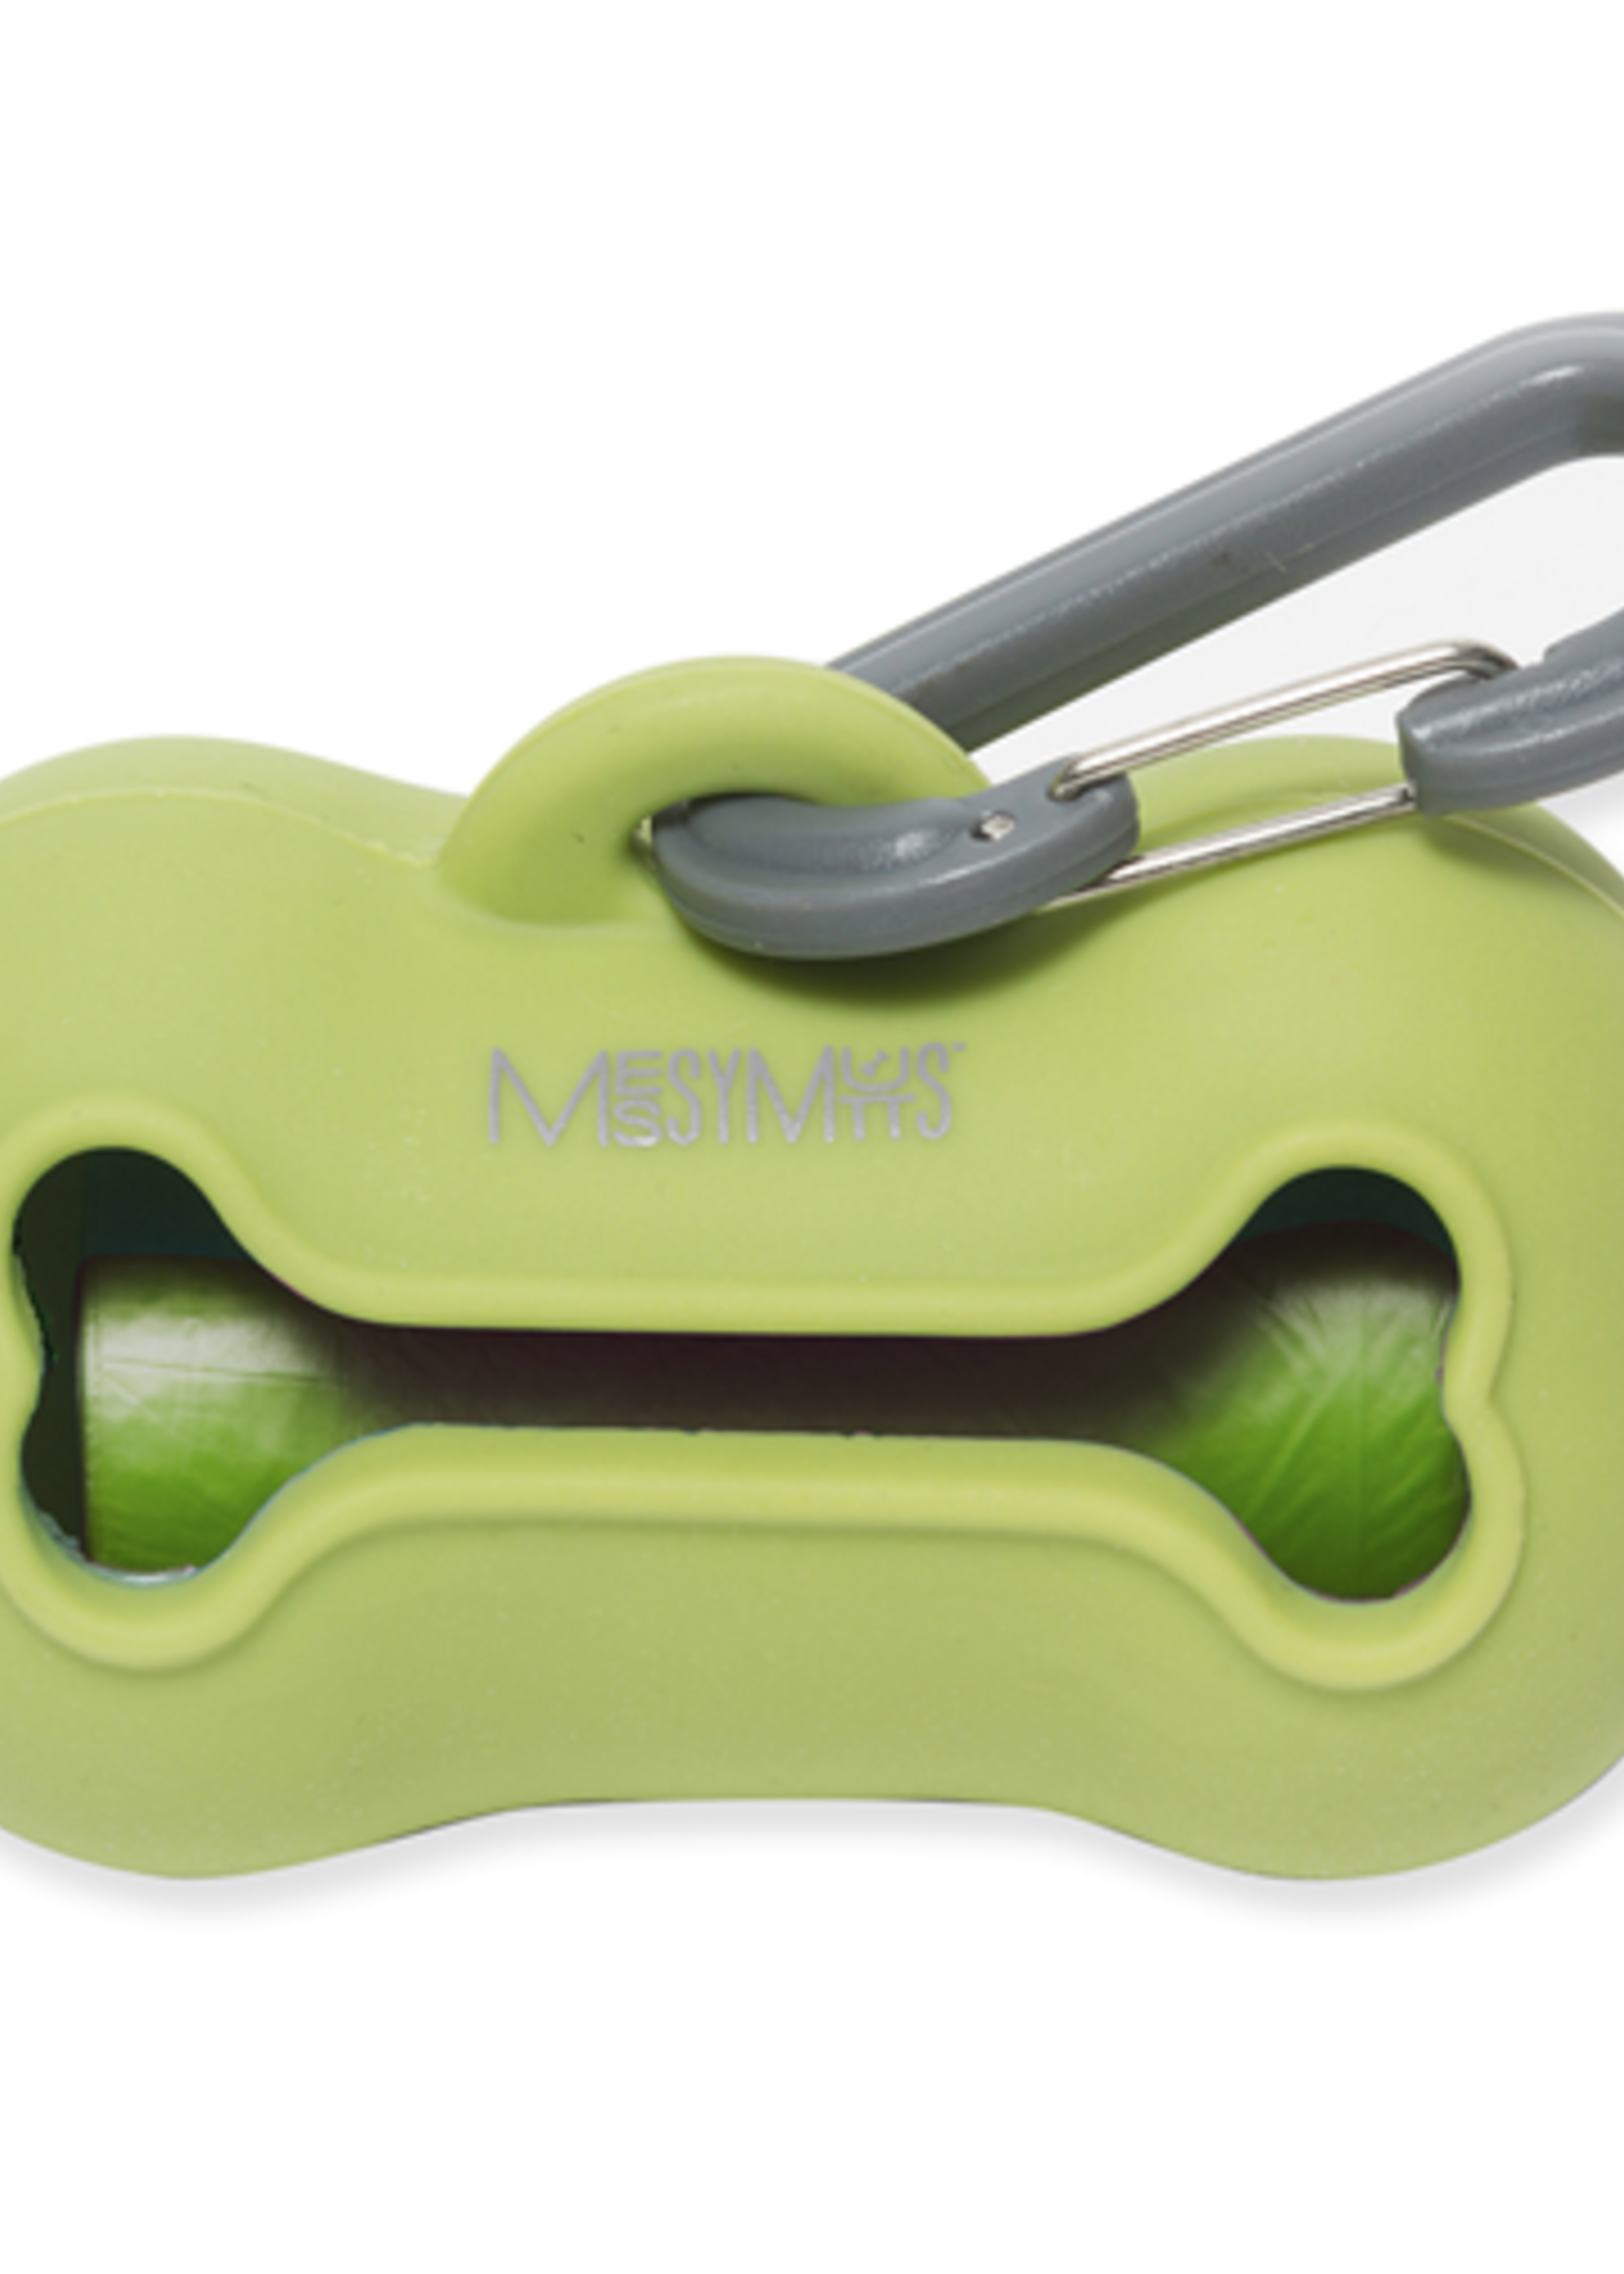 Messy Mutts Messy Mutts Silicone Waste Bag Holder Green